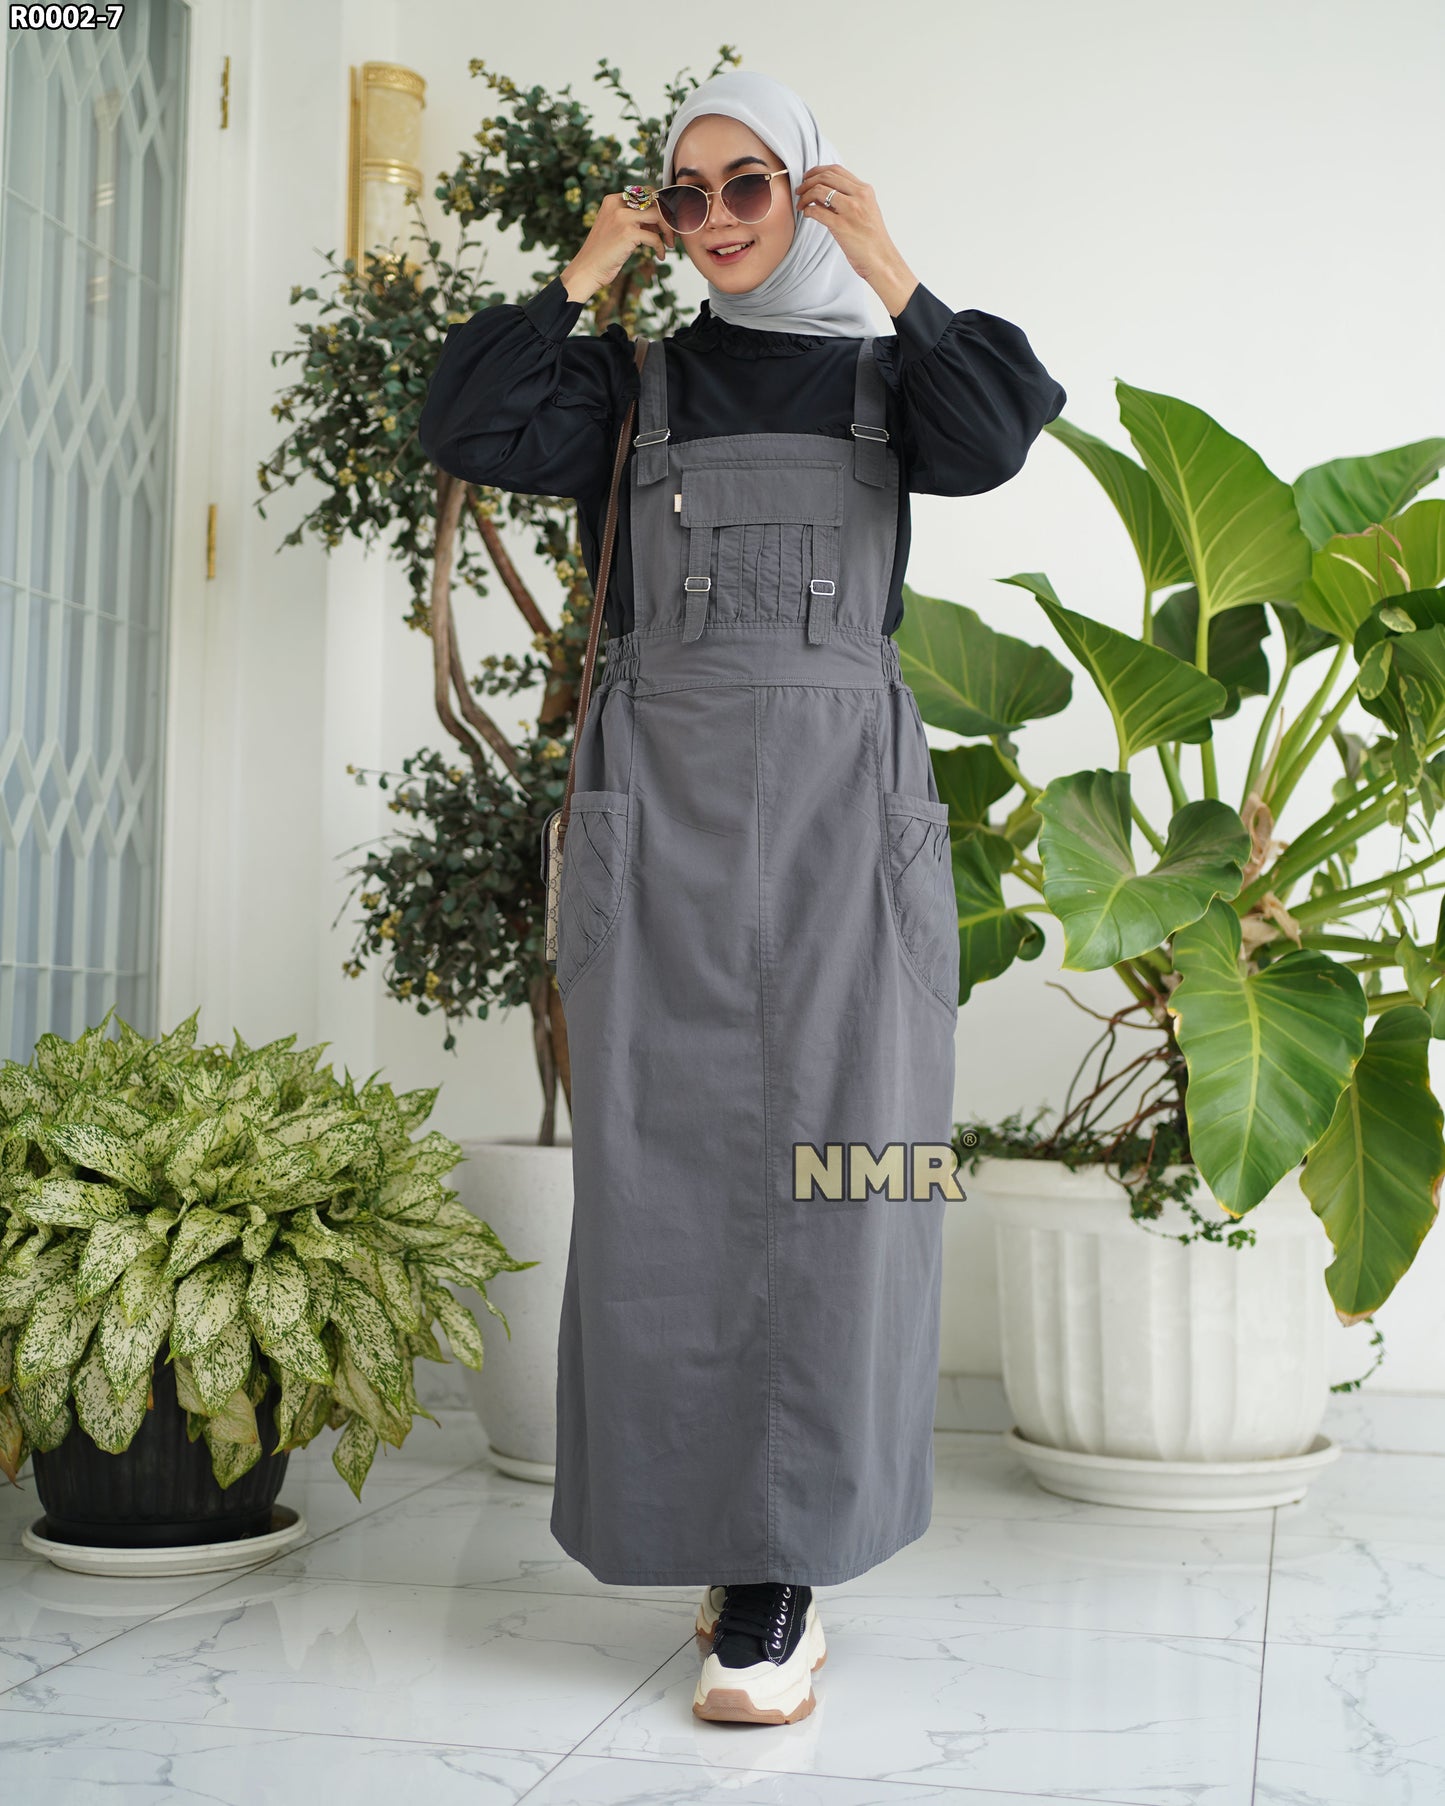 NMR Gamis Jumpsuit Overall Baby Canvas Vol R002-7